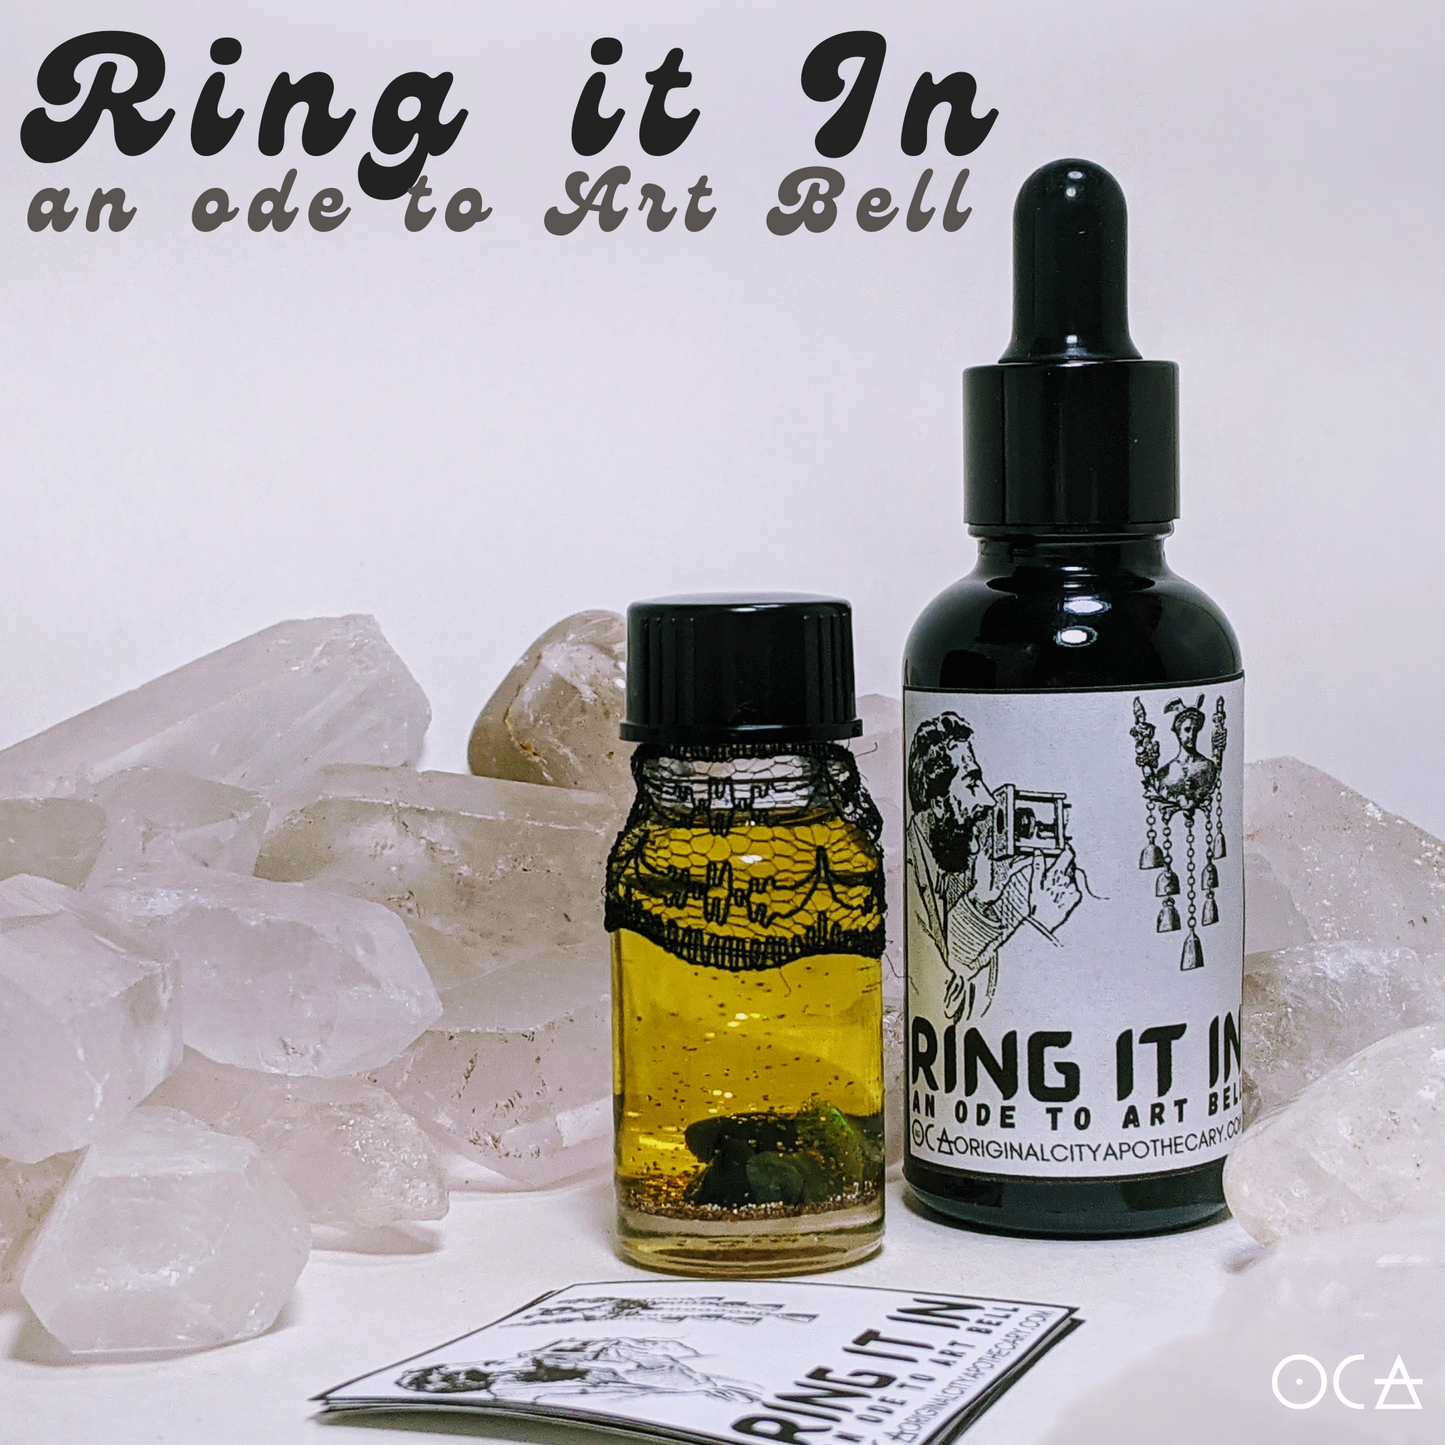 Ring it In, An Ode to Art Bell Herbal Perfume/Oil/Cologne